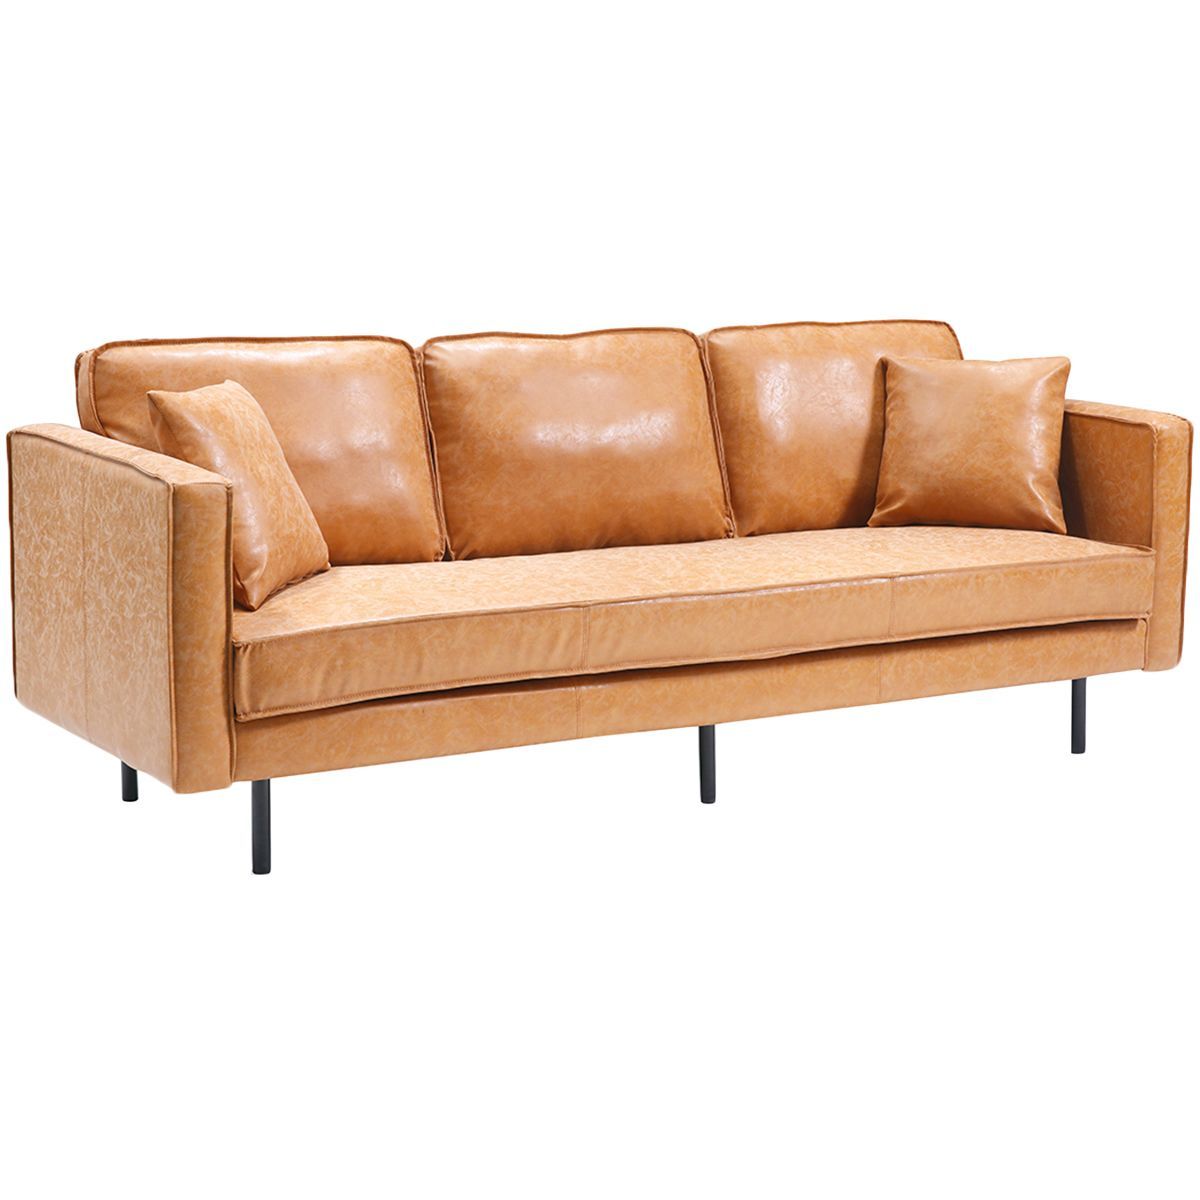 Verona 3 Seater Faux Leather Sofa | Temple & Webster | Faux Leather With Regard To Traditional 3 Seater Faux Leather Sofas (View 5 of 20)